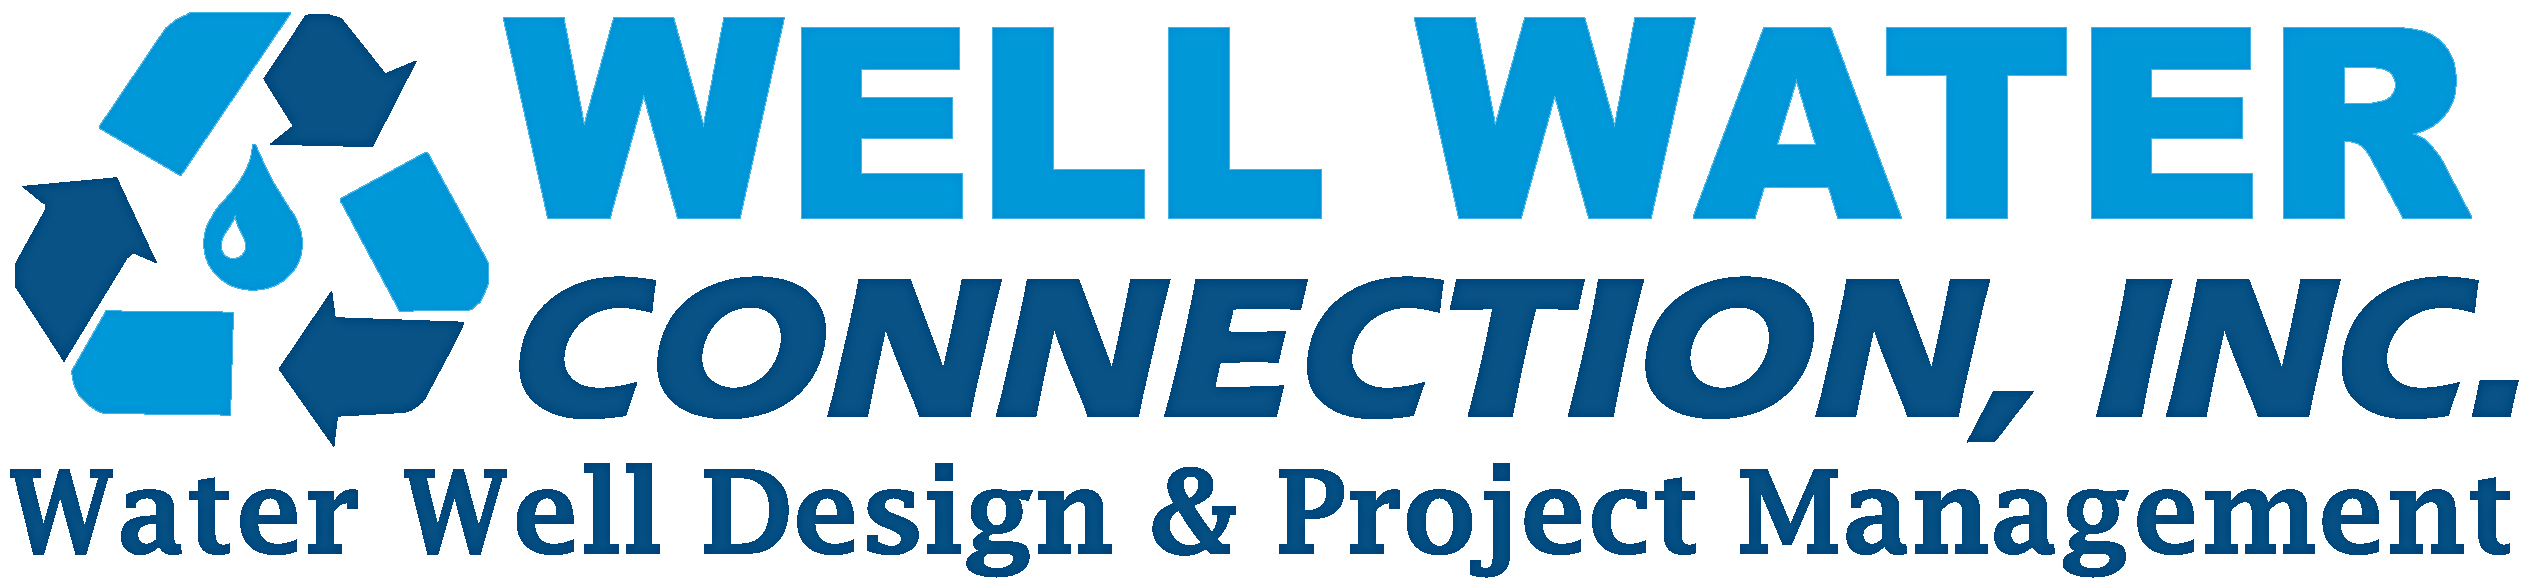 Well Water Connection, Inc. Logo